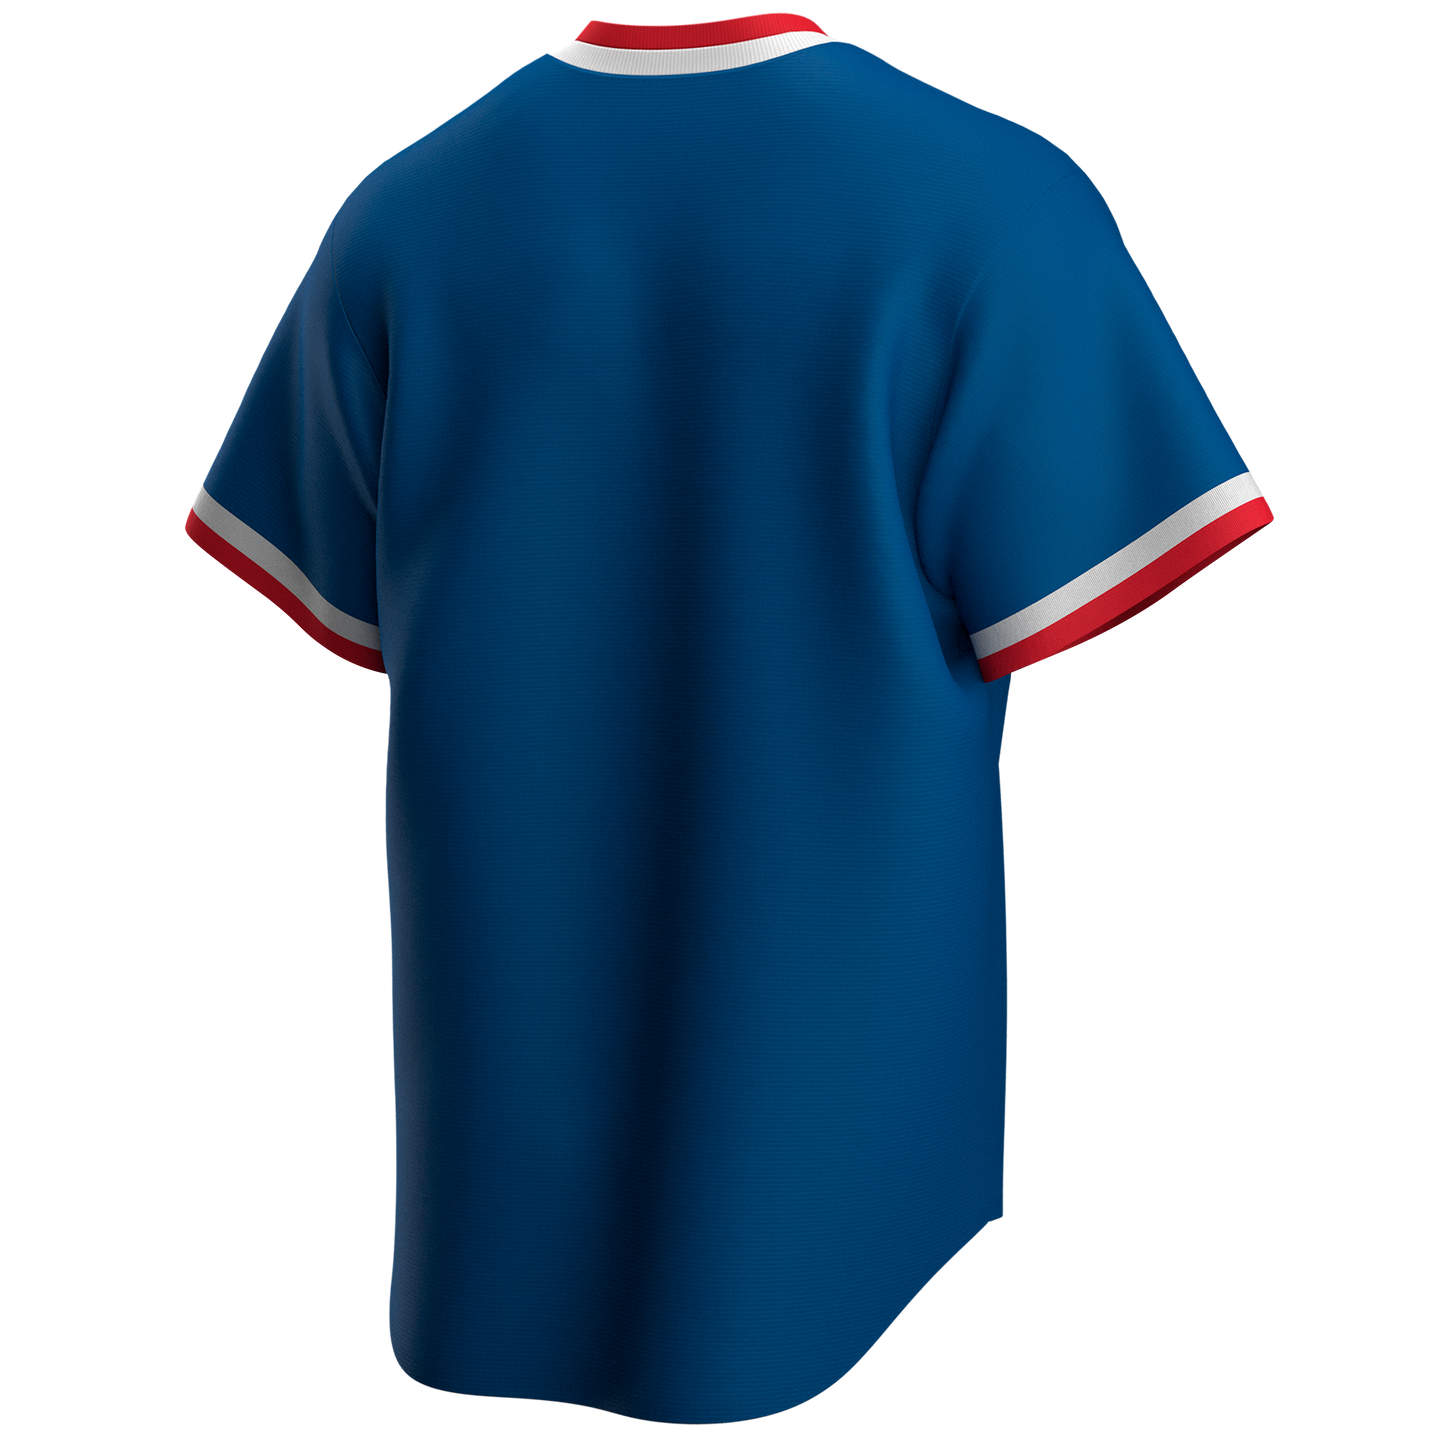 Chicago Cubs Nike Cooperstown Royal V-Neck Jersey